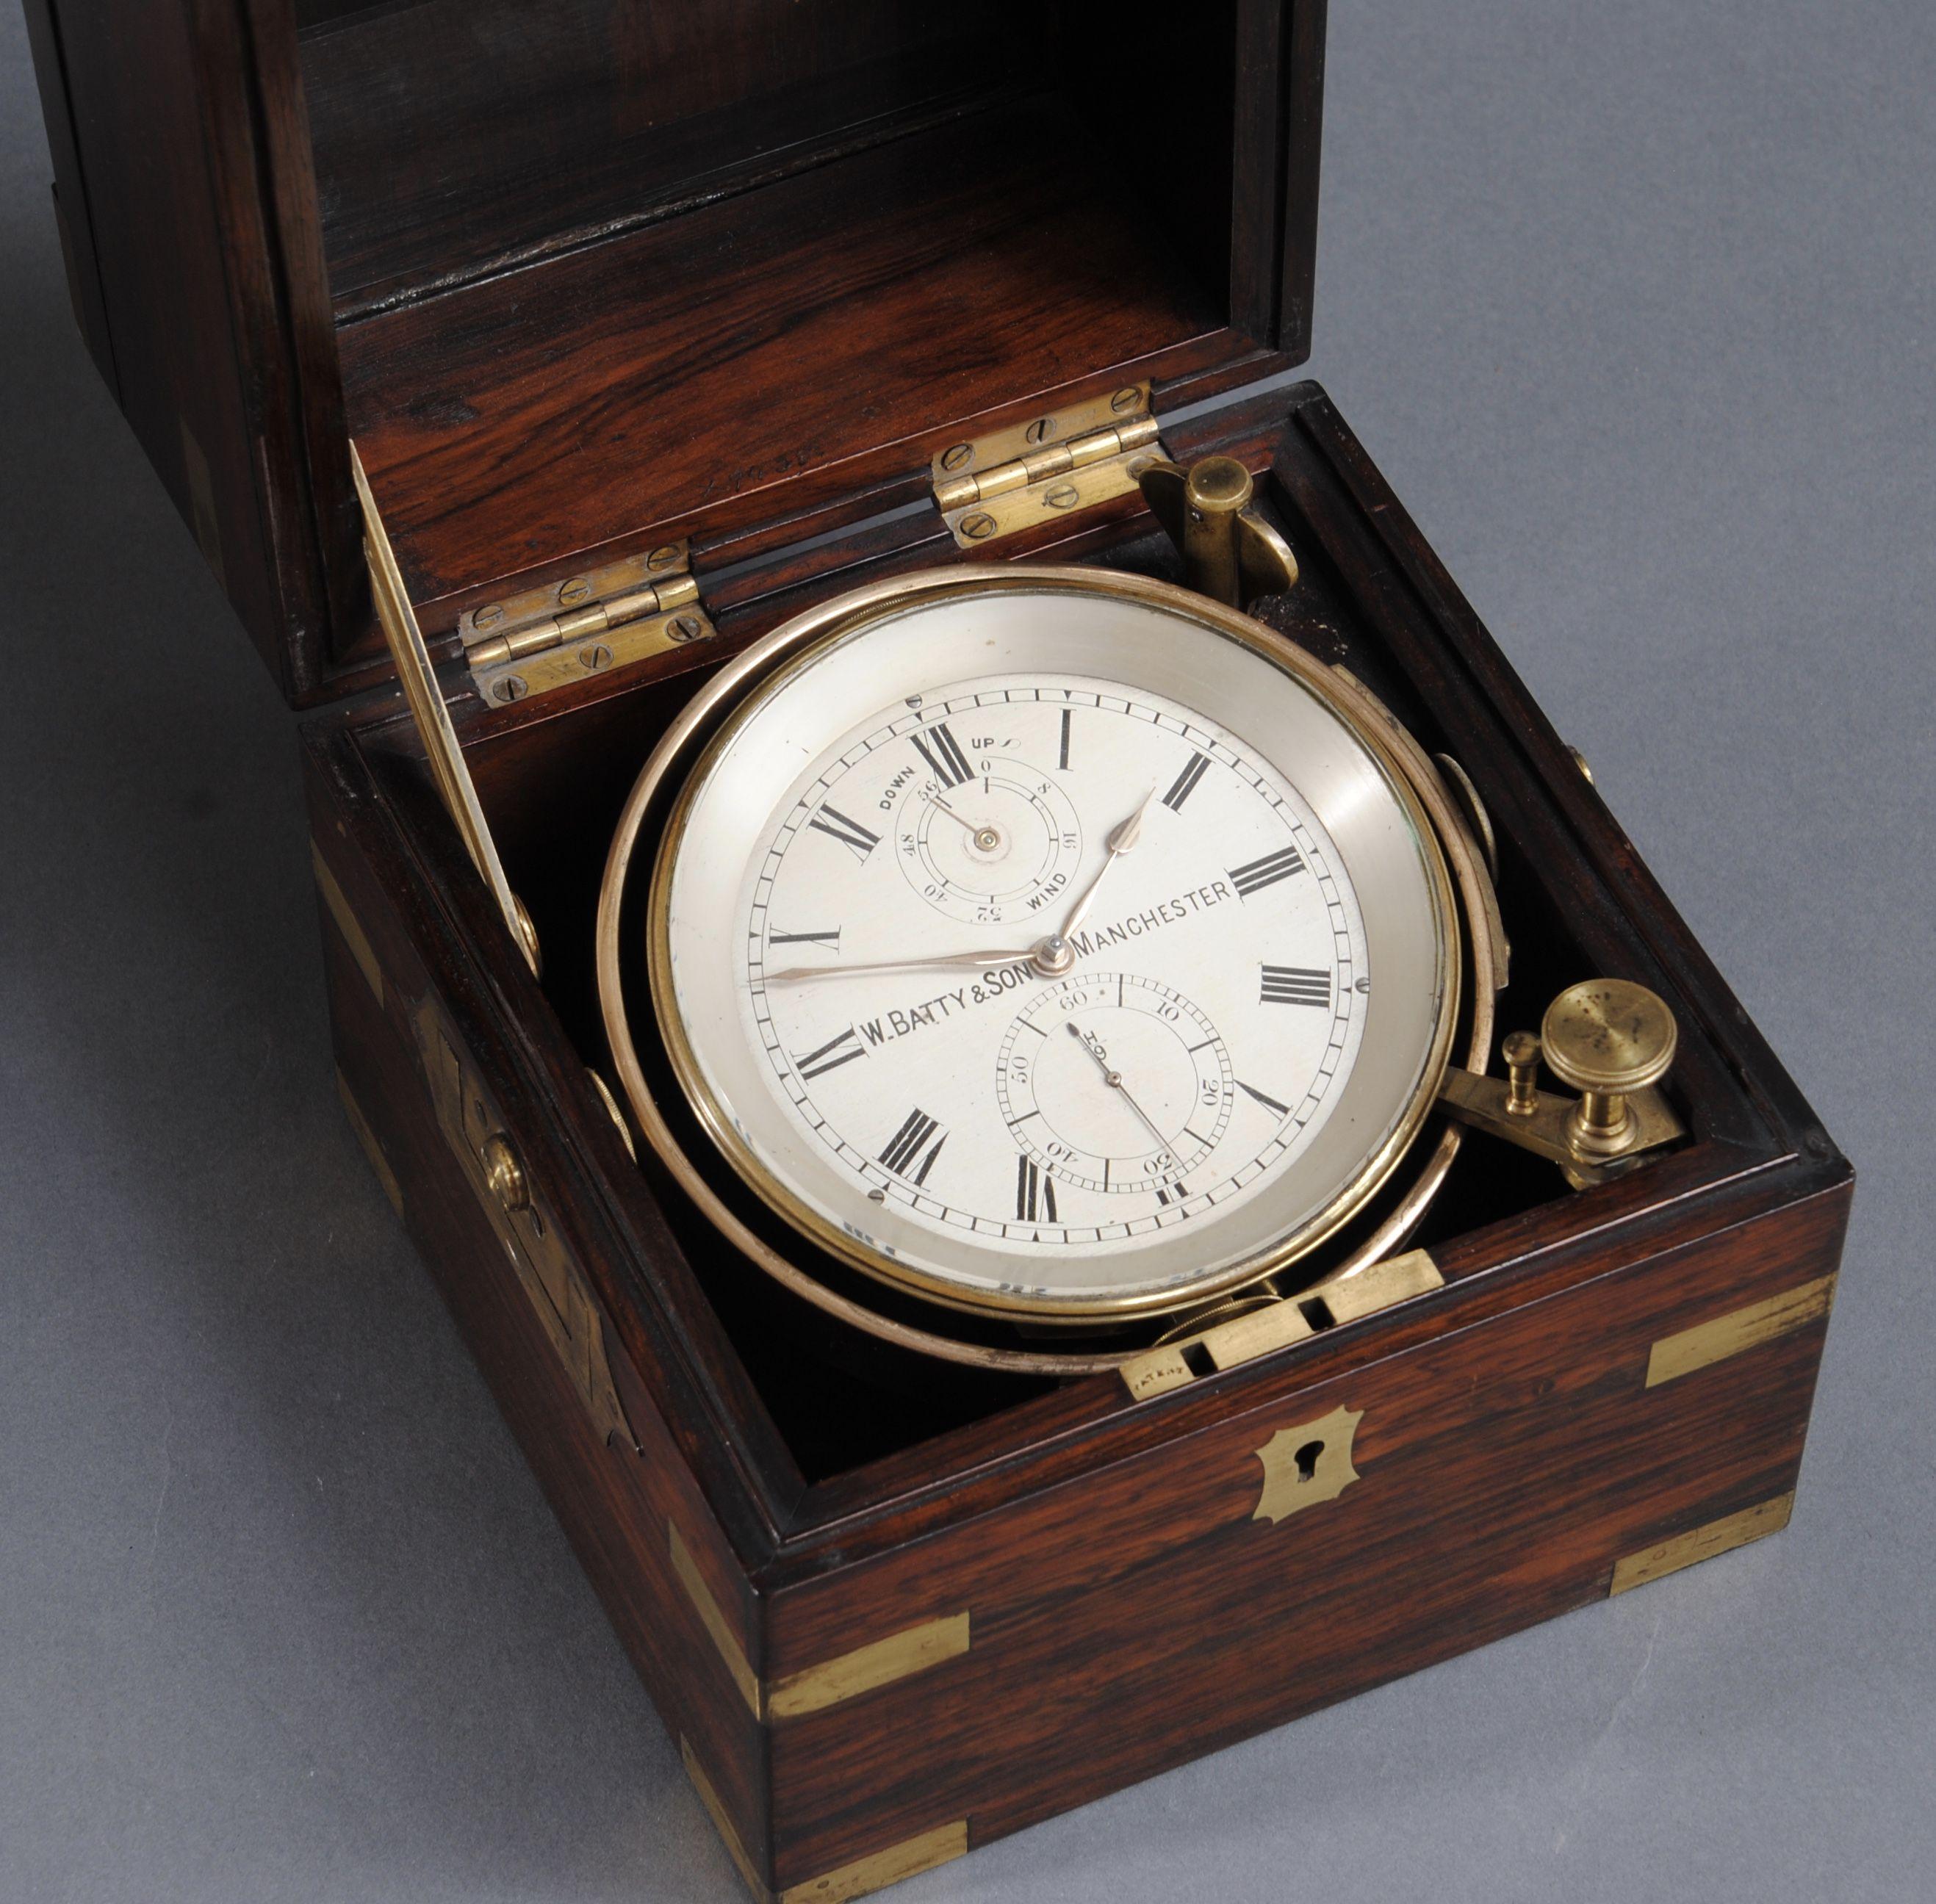 A two day marine chronometer by Batty and sons, Manchester housed in a brass bound rosewood case with gimbals , all retaining the original lacquer. 
The two day movement of fine quality, all fully cleaned and running well. 

Batty is listed in